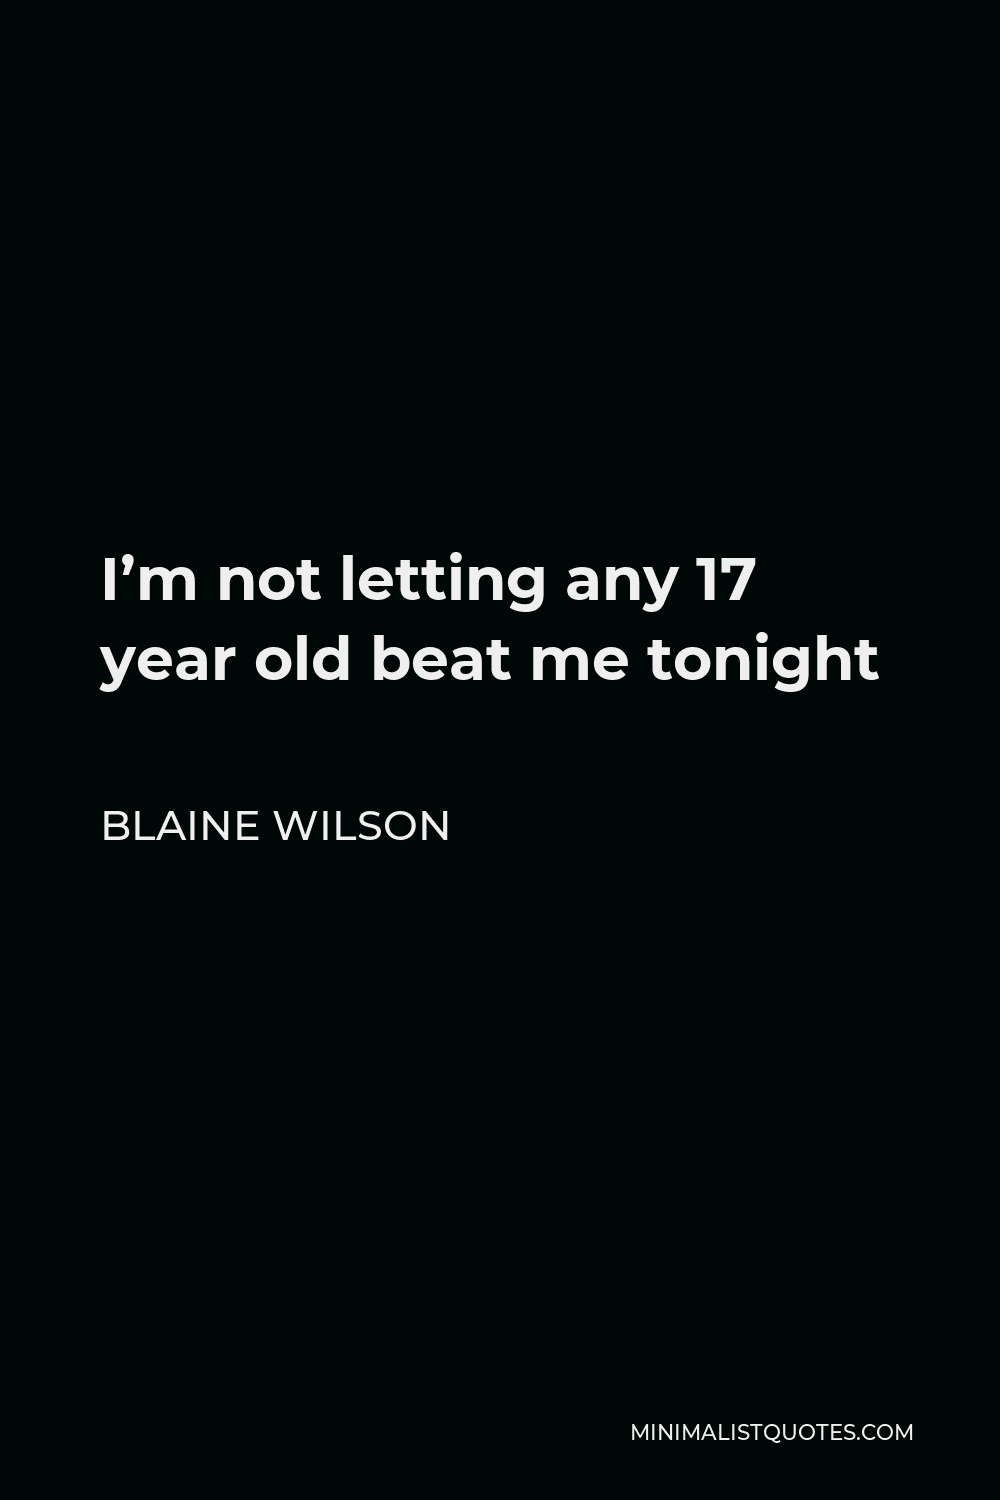 Blaine Wilson Quote - I’m not letting any 17 year old beat me tonight